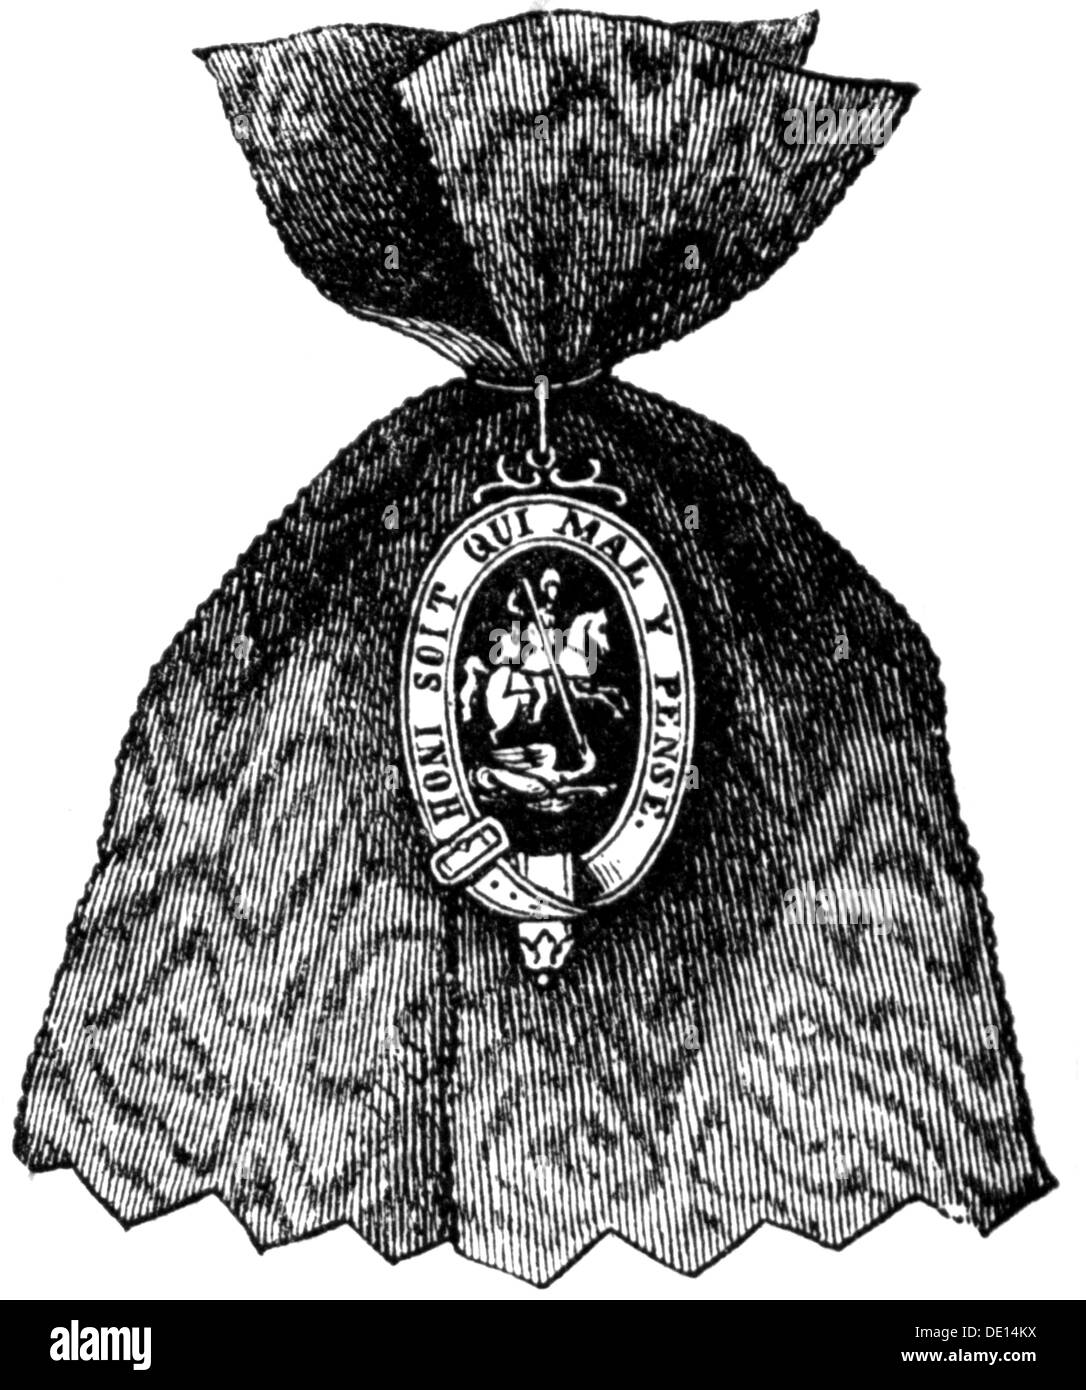 medals and decorations, Great Britain, Order of the Garter, founded 1348 by King Edward III of England, badge, wood engraving, 2nd half 19th century, Order of Chivalry, chivalric order, Kingdom of Great Britain and Ireland, British Empire, The Most Noble Order of the Garter, ribbon, ribbons, historic, historical, Additional-Rights-Clearences-Not Available Stock Photo